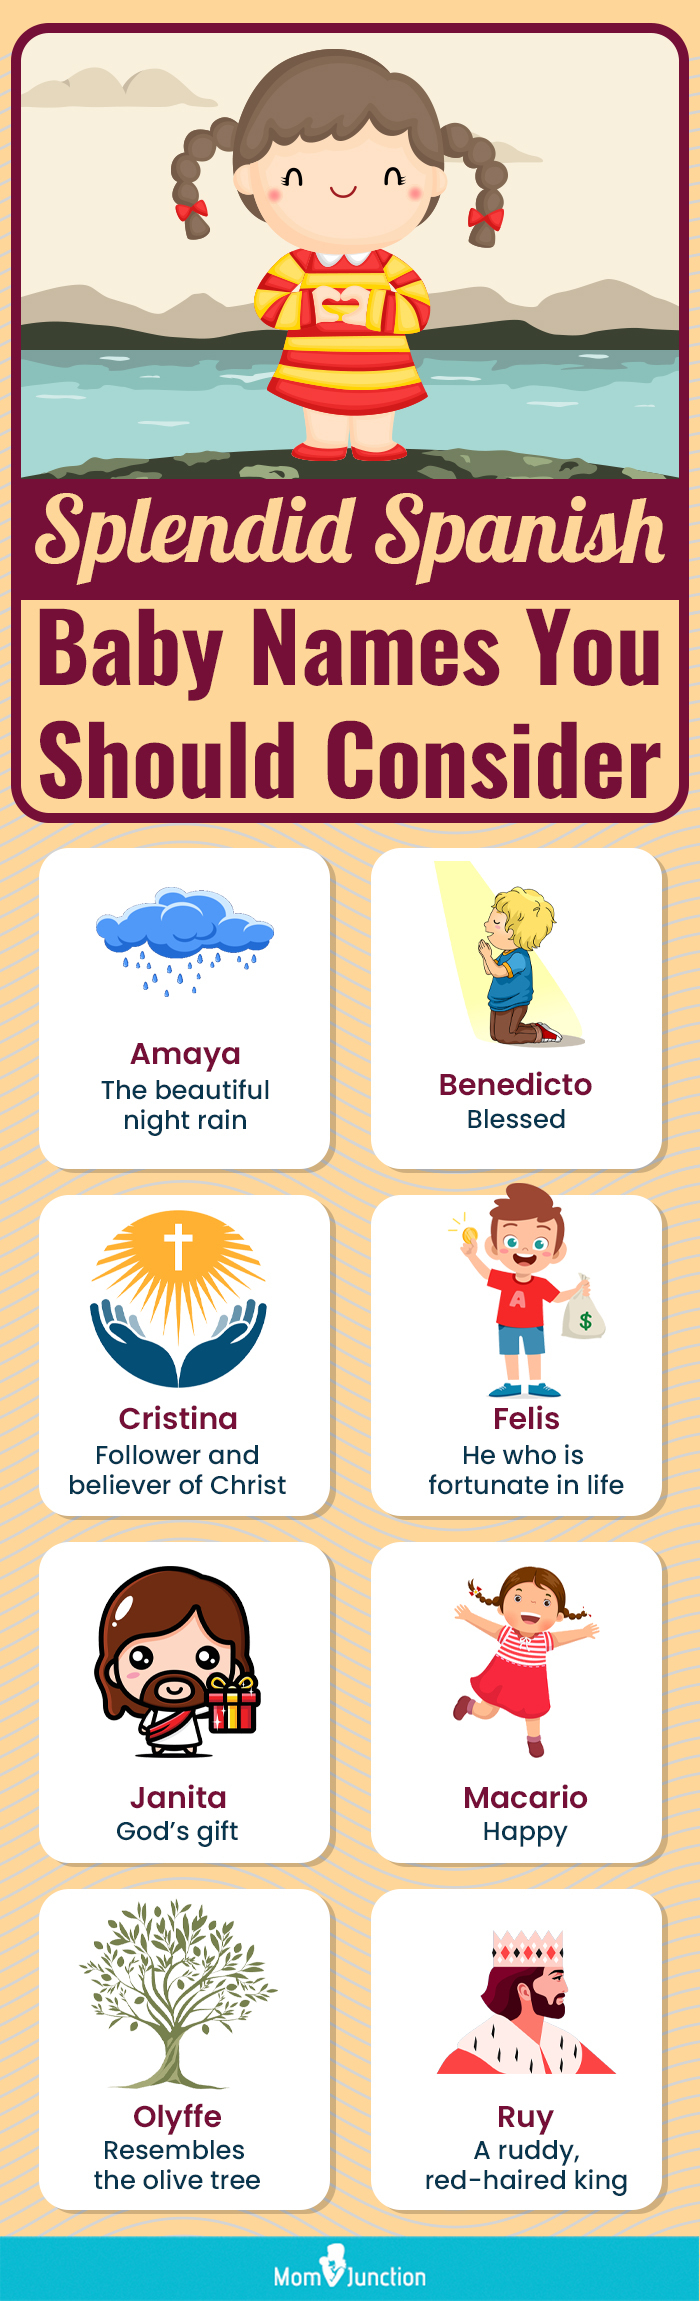 splendid spanish baby names you should consider (infographic)